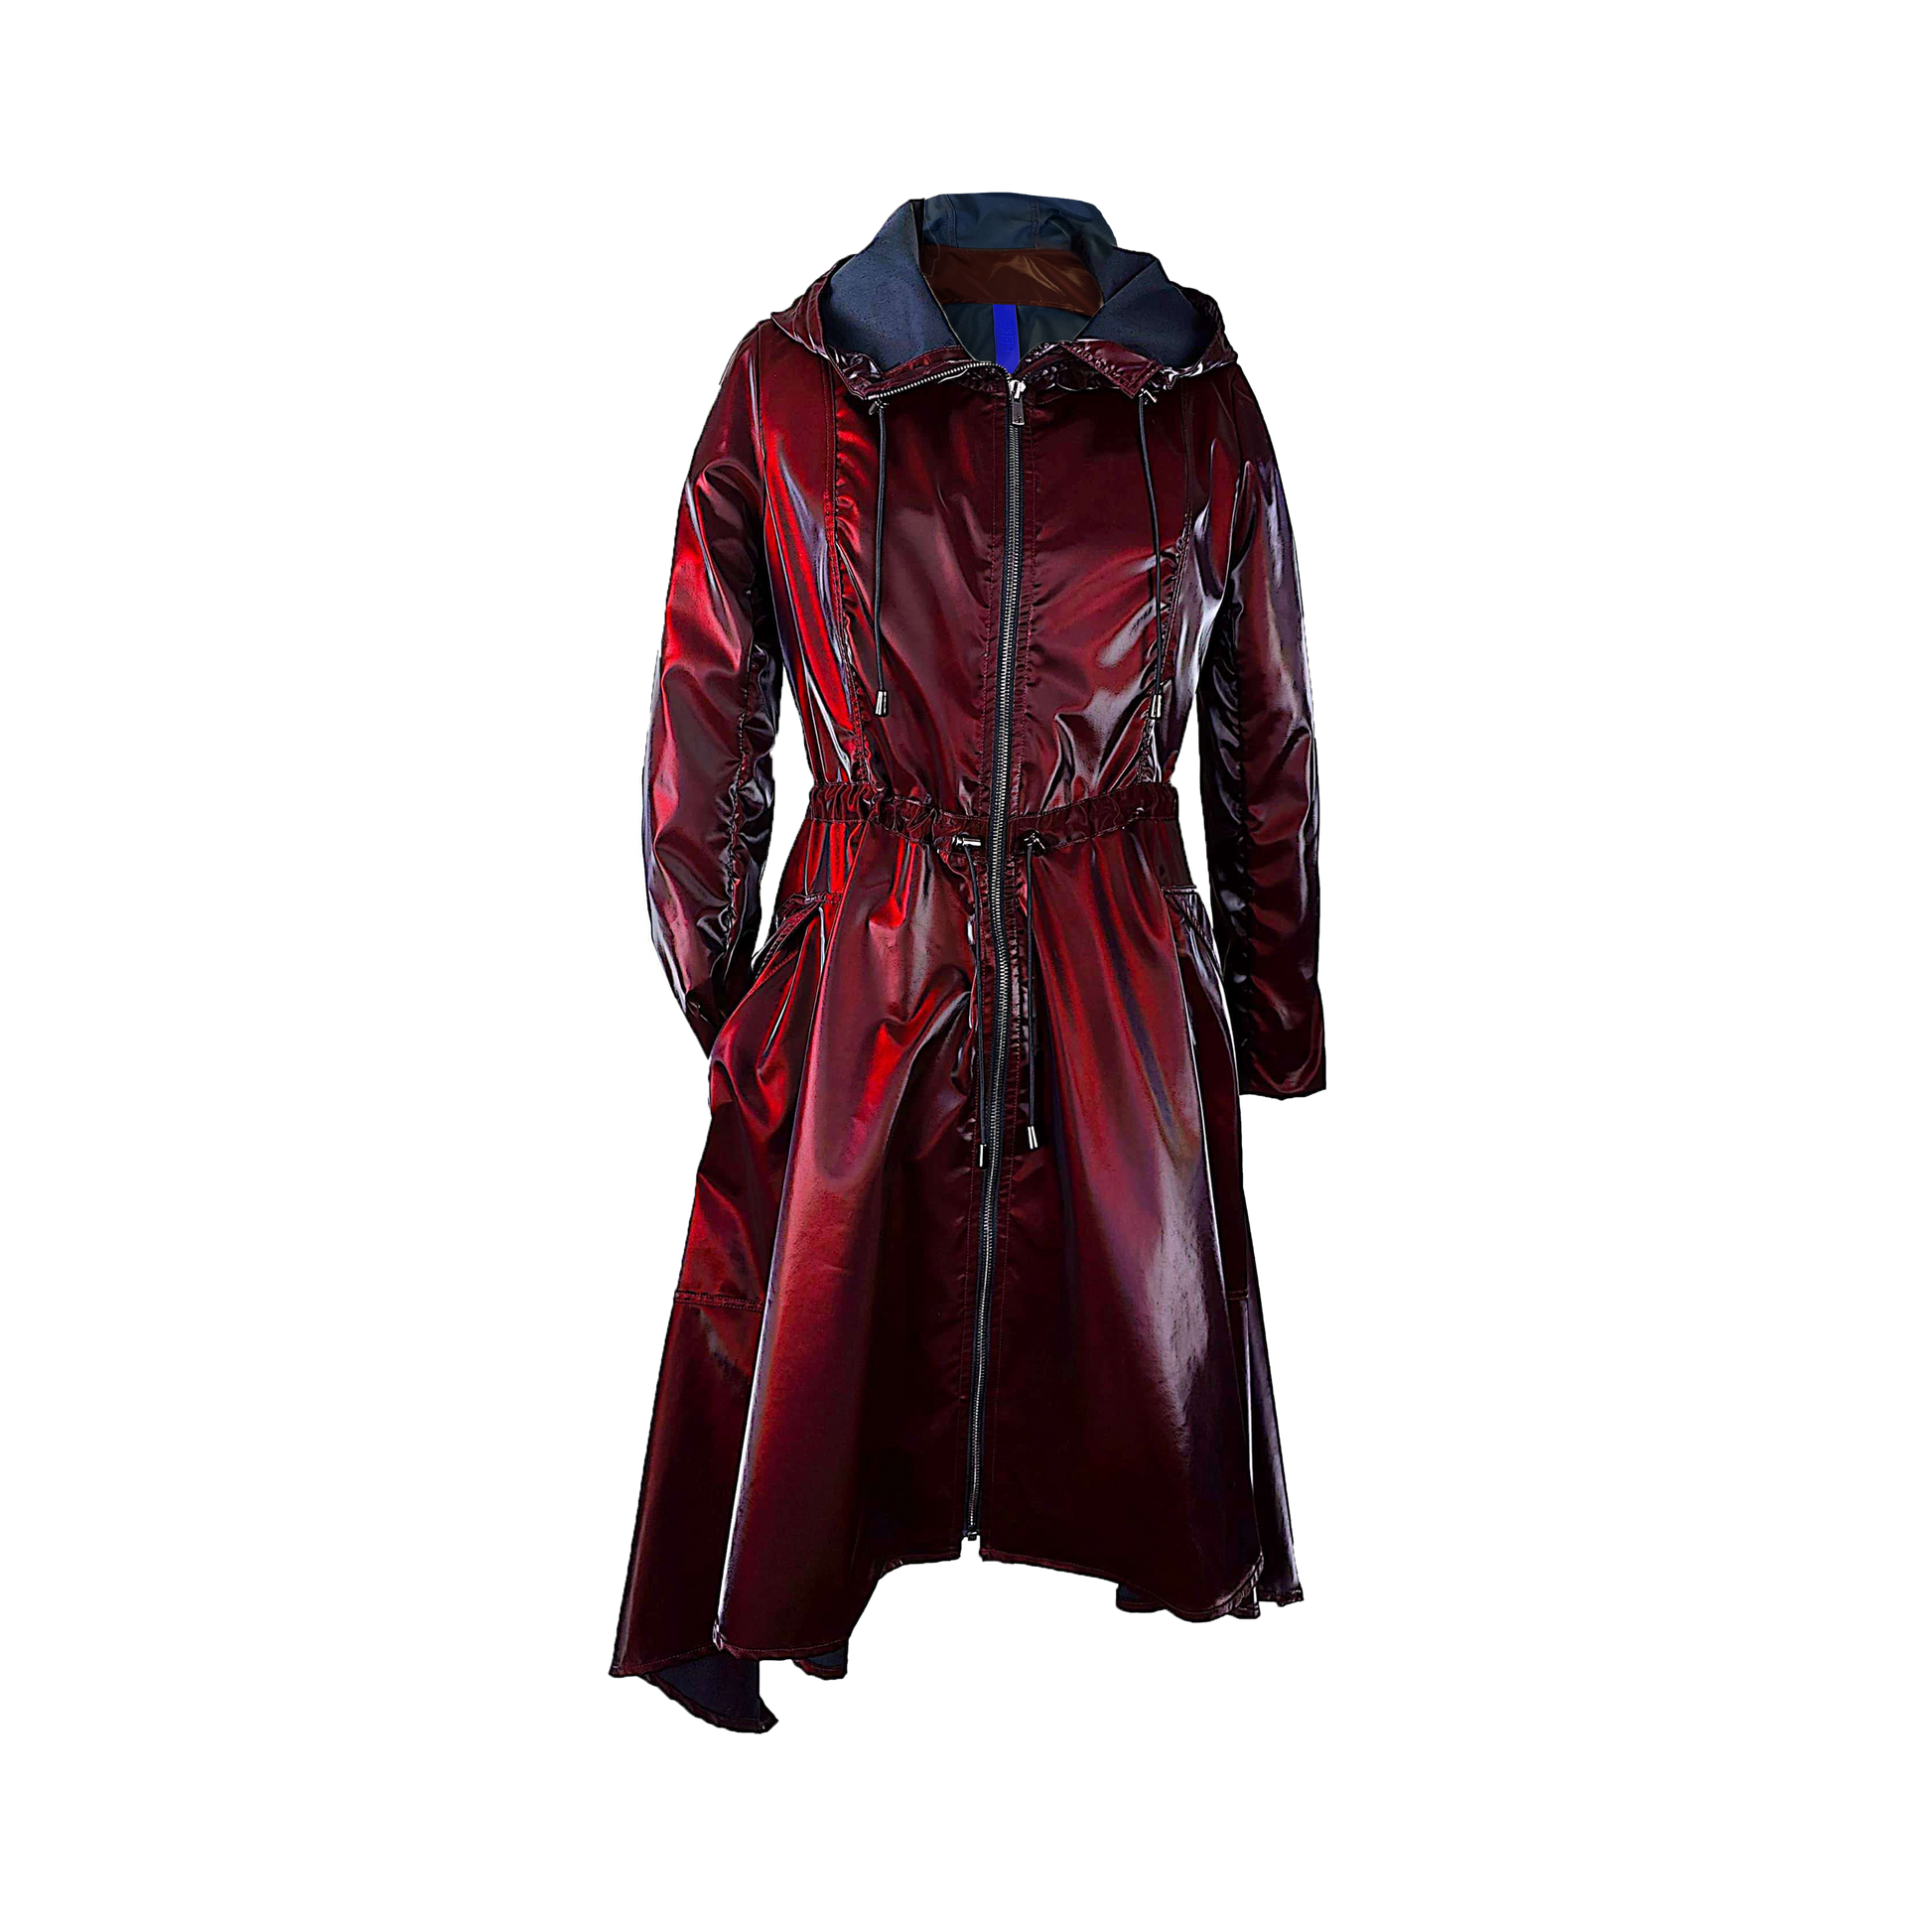 Three layered coat in burgundy lacquered finish with billow pocket detailing